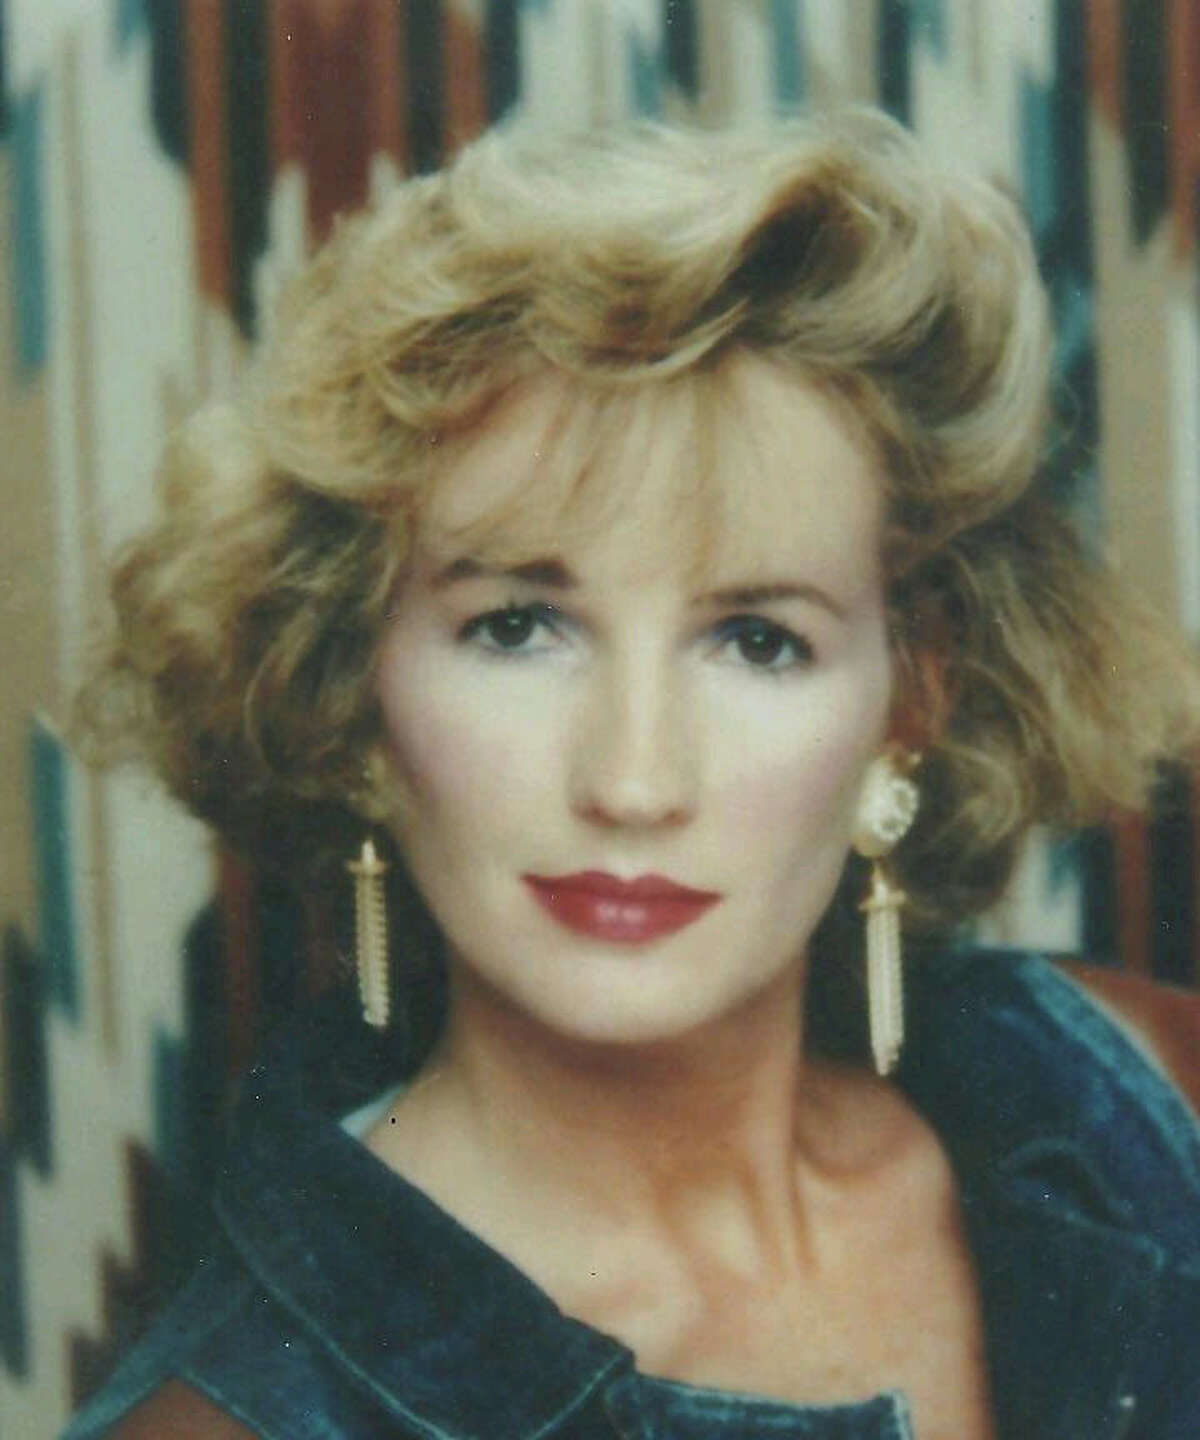 Kathy Page: "On May 14, 1991, the deceased body of Kathy Page was found inside her vehicle in close proximity to her residence in Vidor. An autopsy of Kathy's body revealed she had been murdered. Kathy was last seen in Beaumont a few hours before her body was found. Kathy Page was a 34-year-old white female who worked at the Hoffbrau Restaurant in Beaumont. Kathy resided in Vidor with her two daughters, one 12 and one 7 years of age. Kathy and her husband were separated when she murdered." (Texas Rangers)